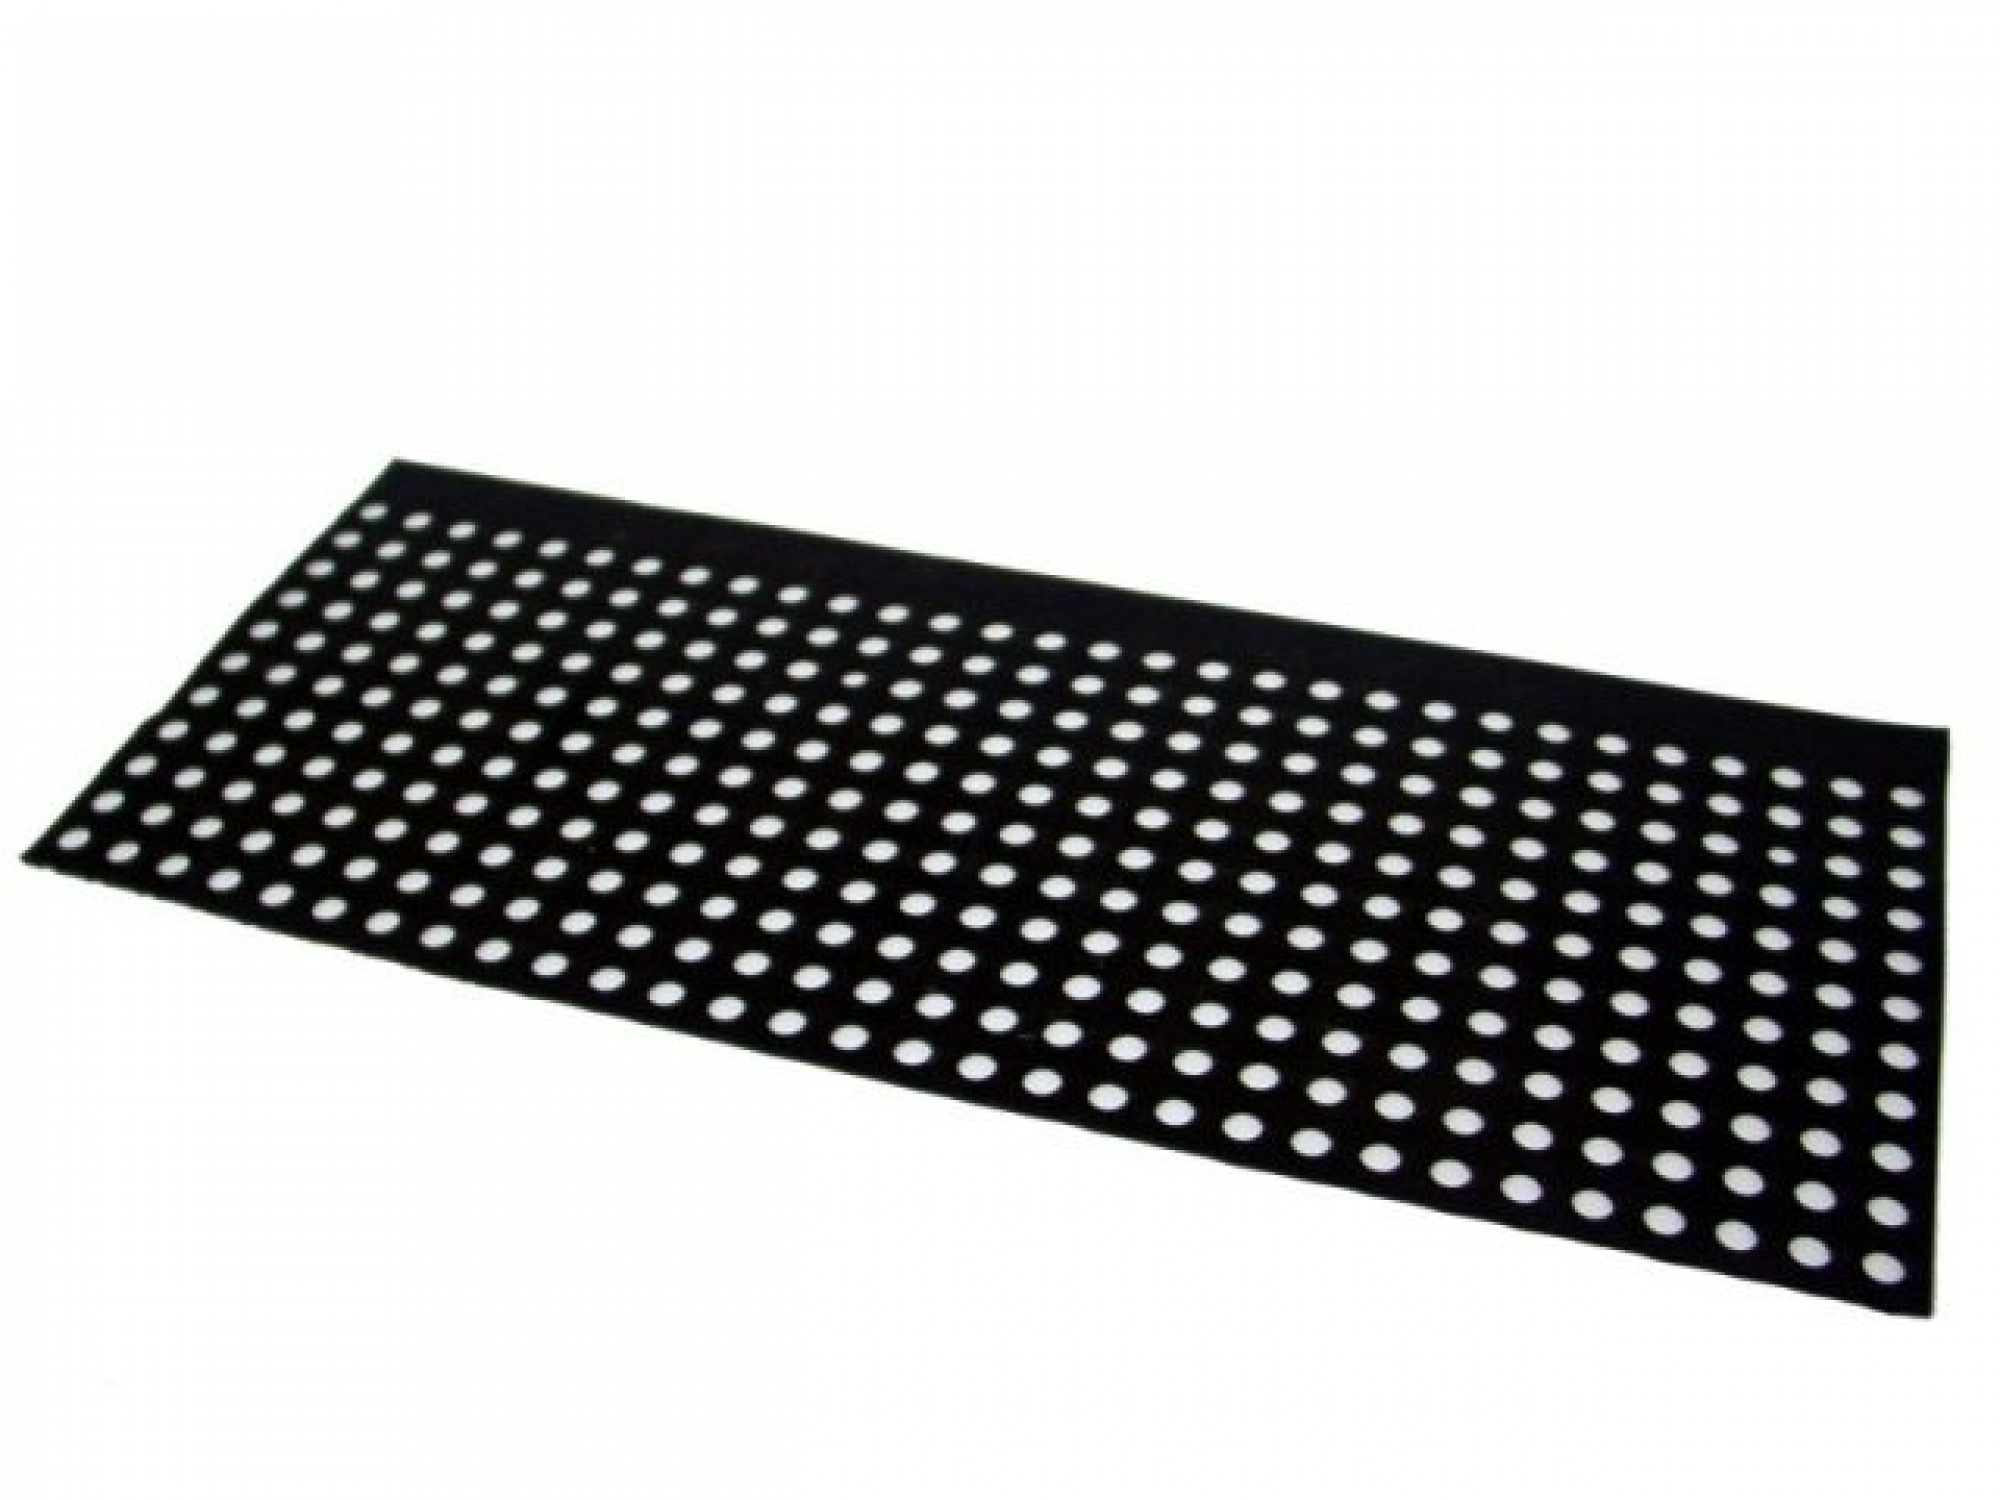 Perforated rubber mat 1000 x 500 mm